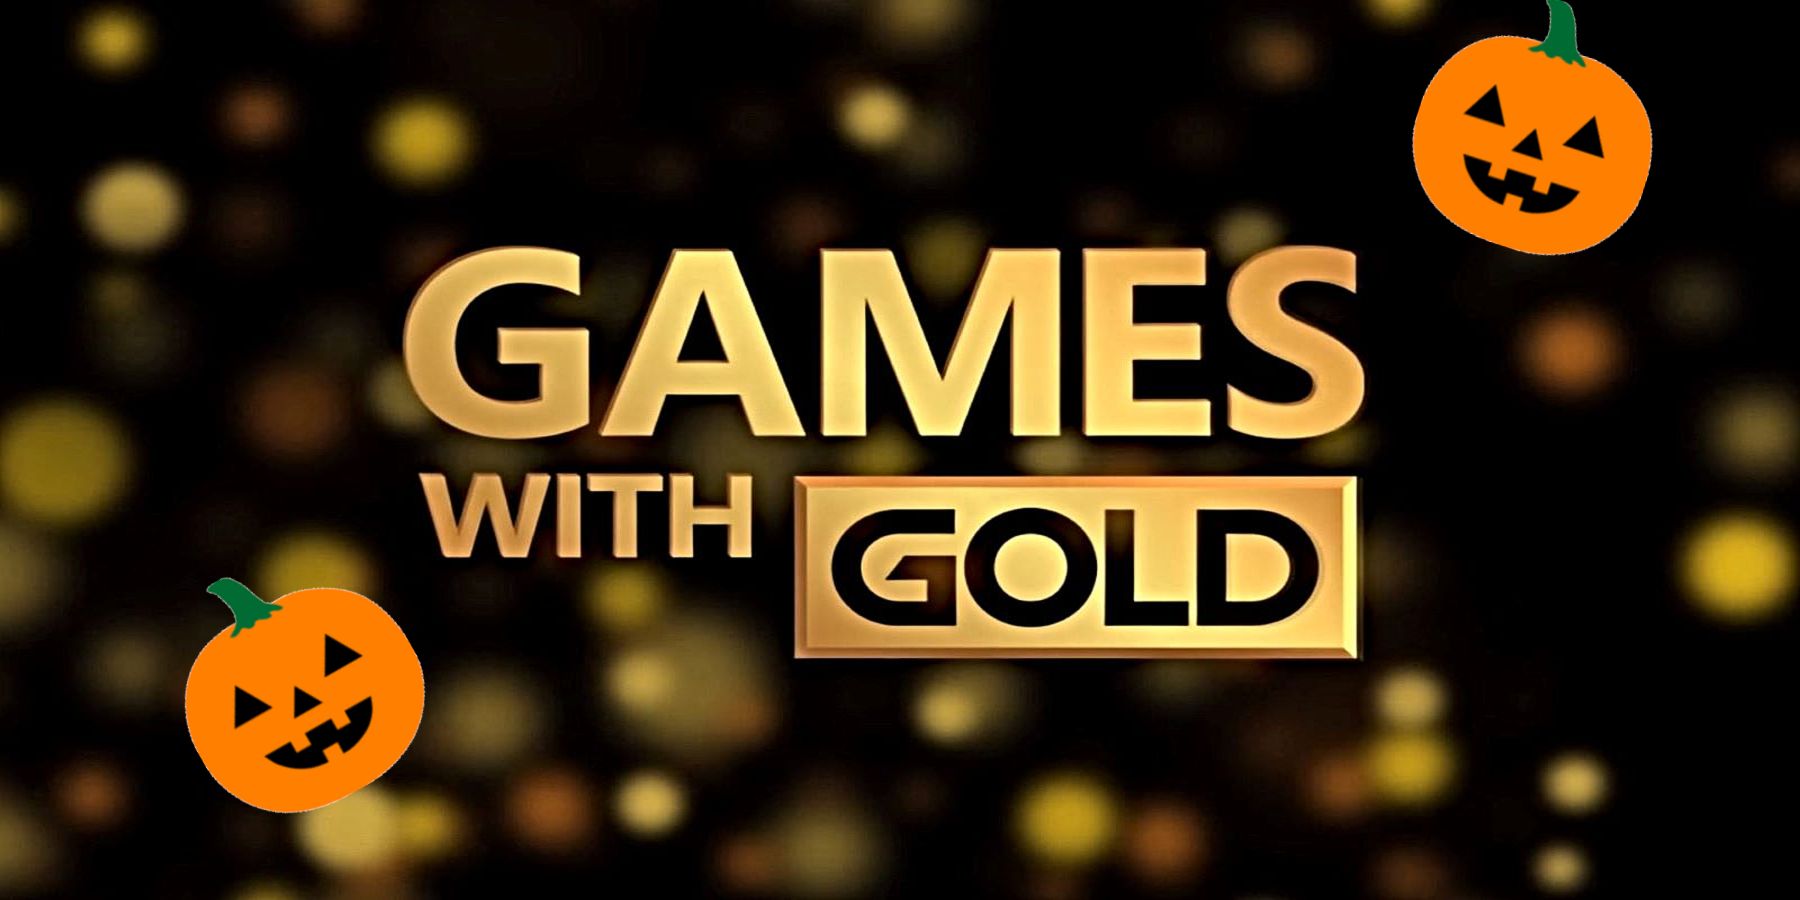 Only two games offered for October's Xbox Games with Gold, but